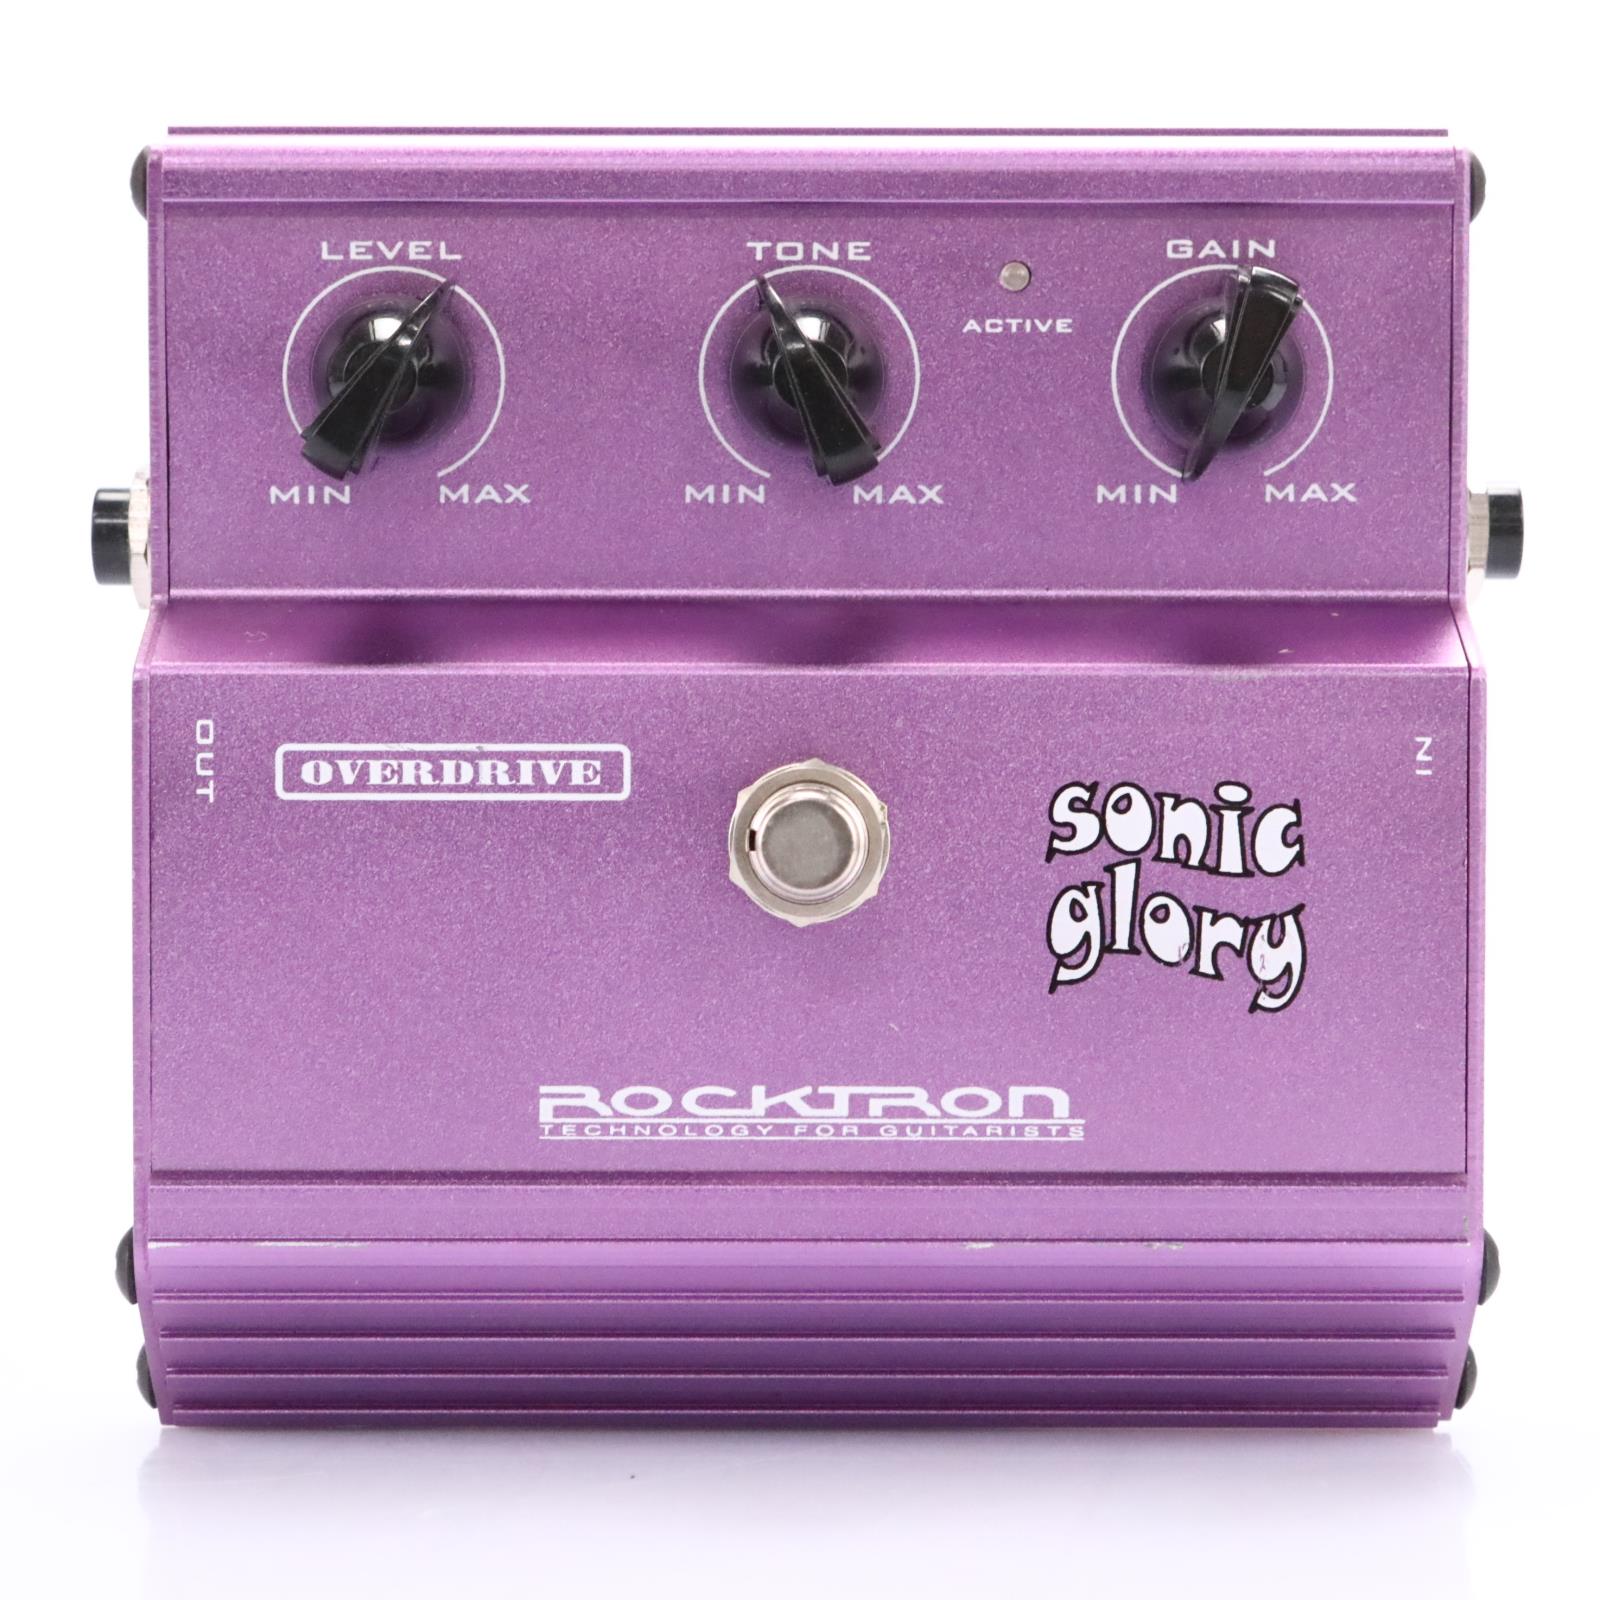 Rocktron Sonic Glory Overdrive Guitar Effect Pedal #51032